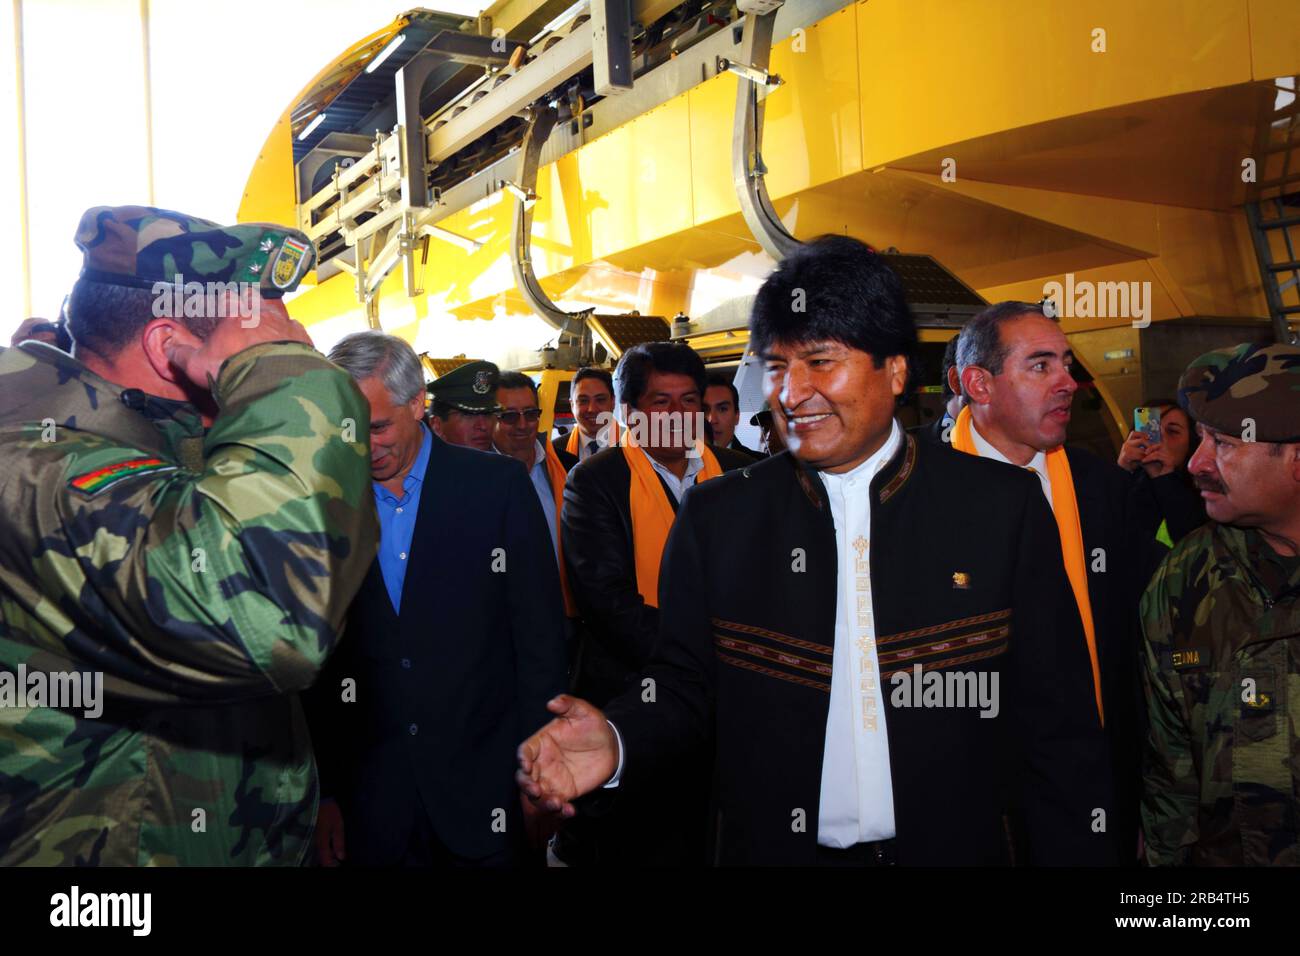 El Alto, Bolivia, 15th September 2014. Bolivian president Evo Morales (centre) greets an army officer as he arrives at the station in Ciudad Satelite for the inauguration ceremony of the Yellow Line. The Yellow Line is the second of three cable car lines to be opened this year, and is part of an ambitious project to relieve traffic congestion. The first line opened in May, when all three are open they will be the world's longest urban cable car system. The system has been built by the Austrian company Doppelmayr. Stock Photo